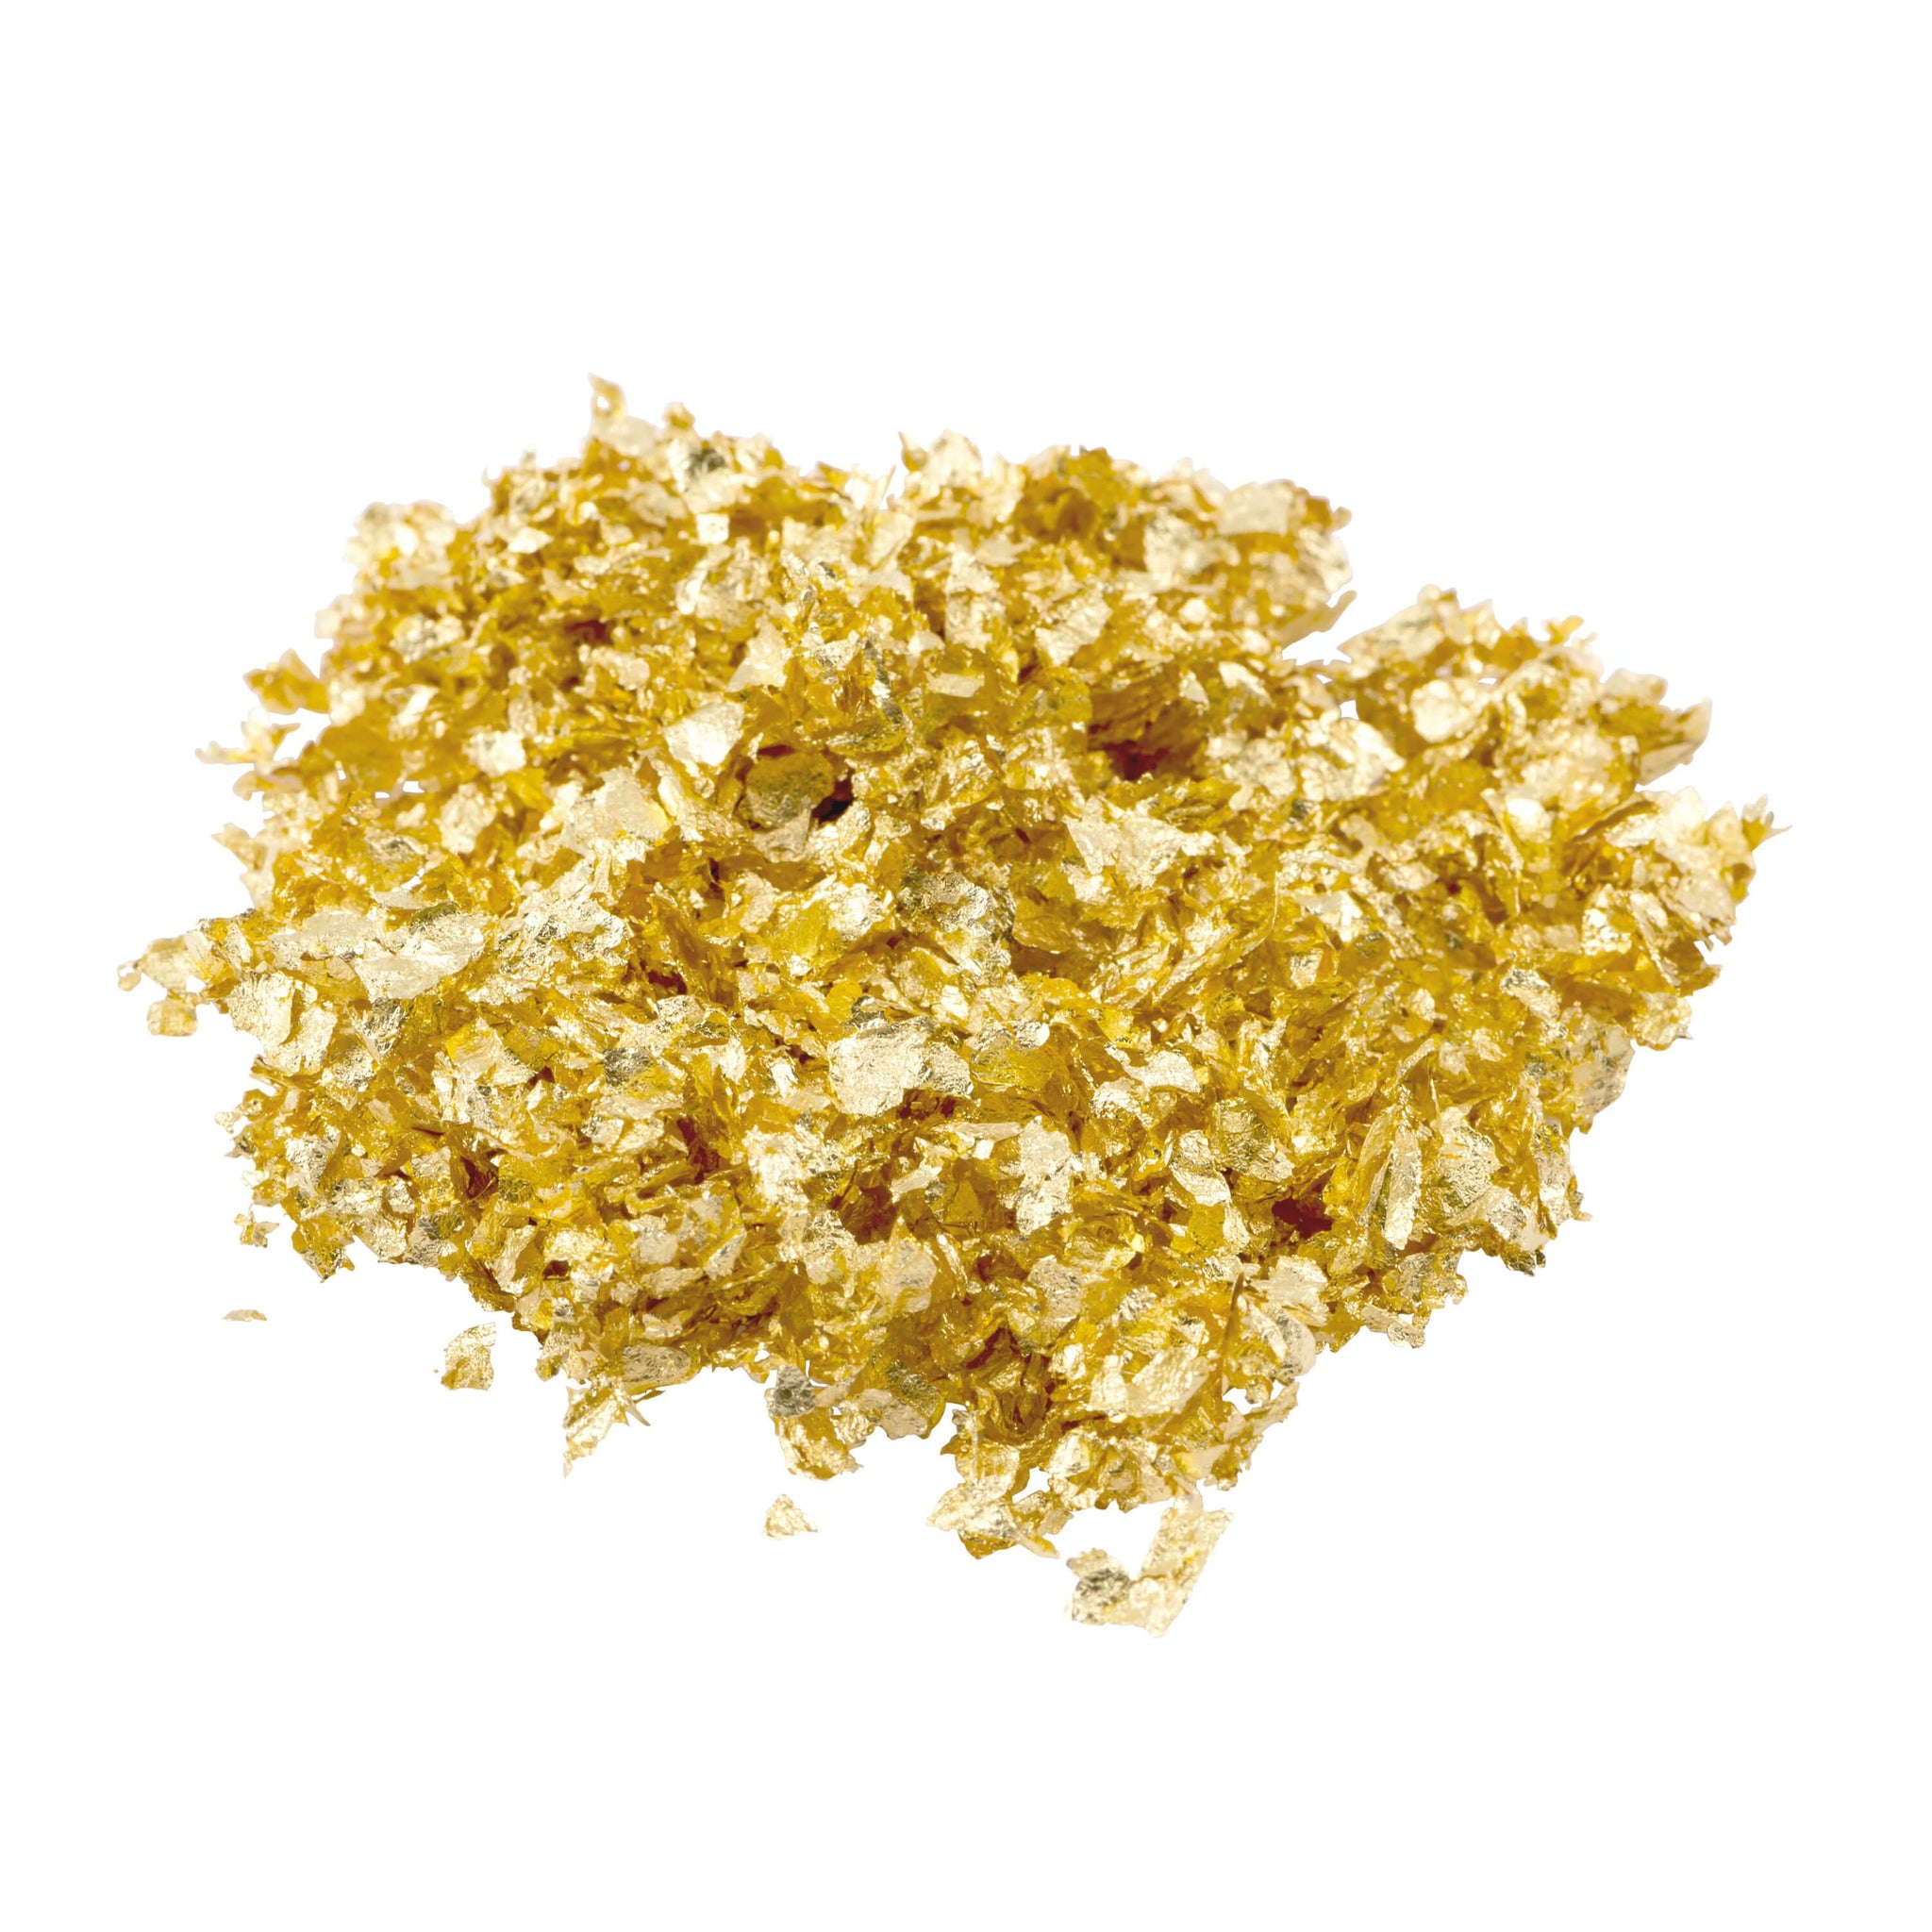 Gold Flakes - Edible Gold Leaf Flakes for Garnishing and Decoration Metal leaf Slofoodgroup 25 MG 